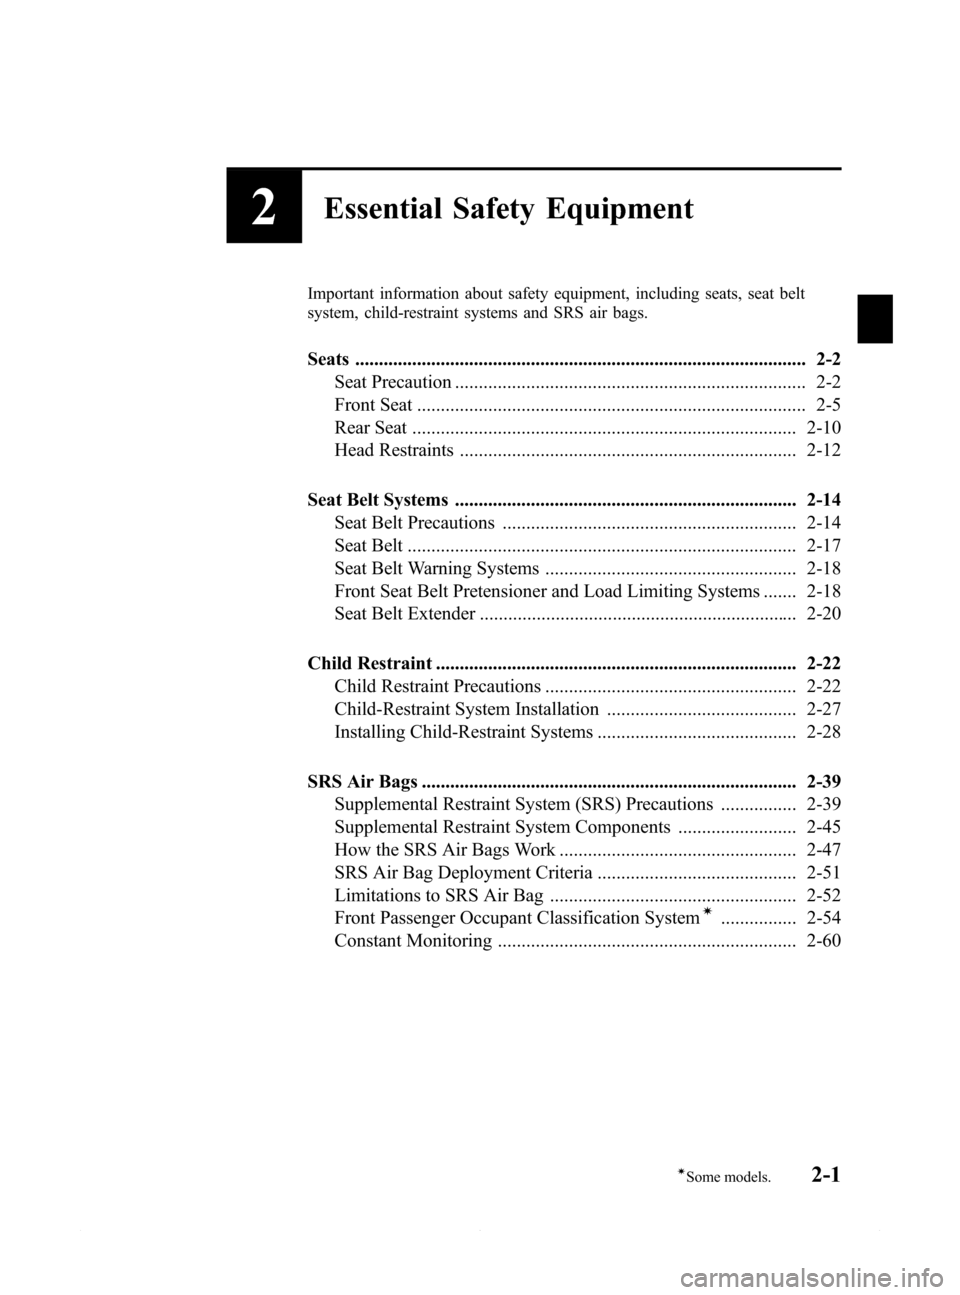 MAZDA MODEL 6 2014  Owners Manual (in English) Black plate (13,1)
2Essential Safety Equipment
Important information about safety equipment, including seats, seat belt
system, child-restraint systems and SRS air bags.
Seats ........................